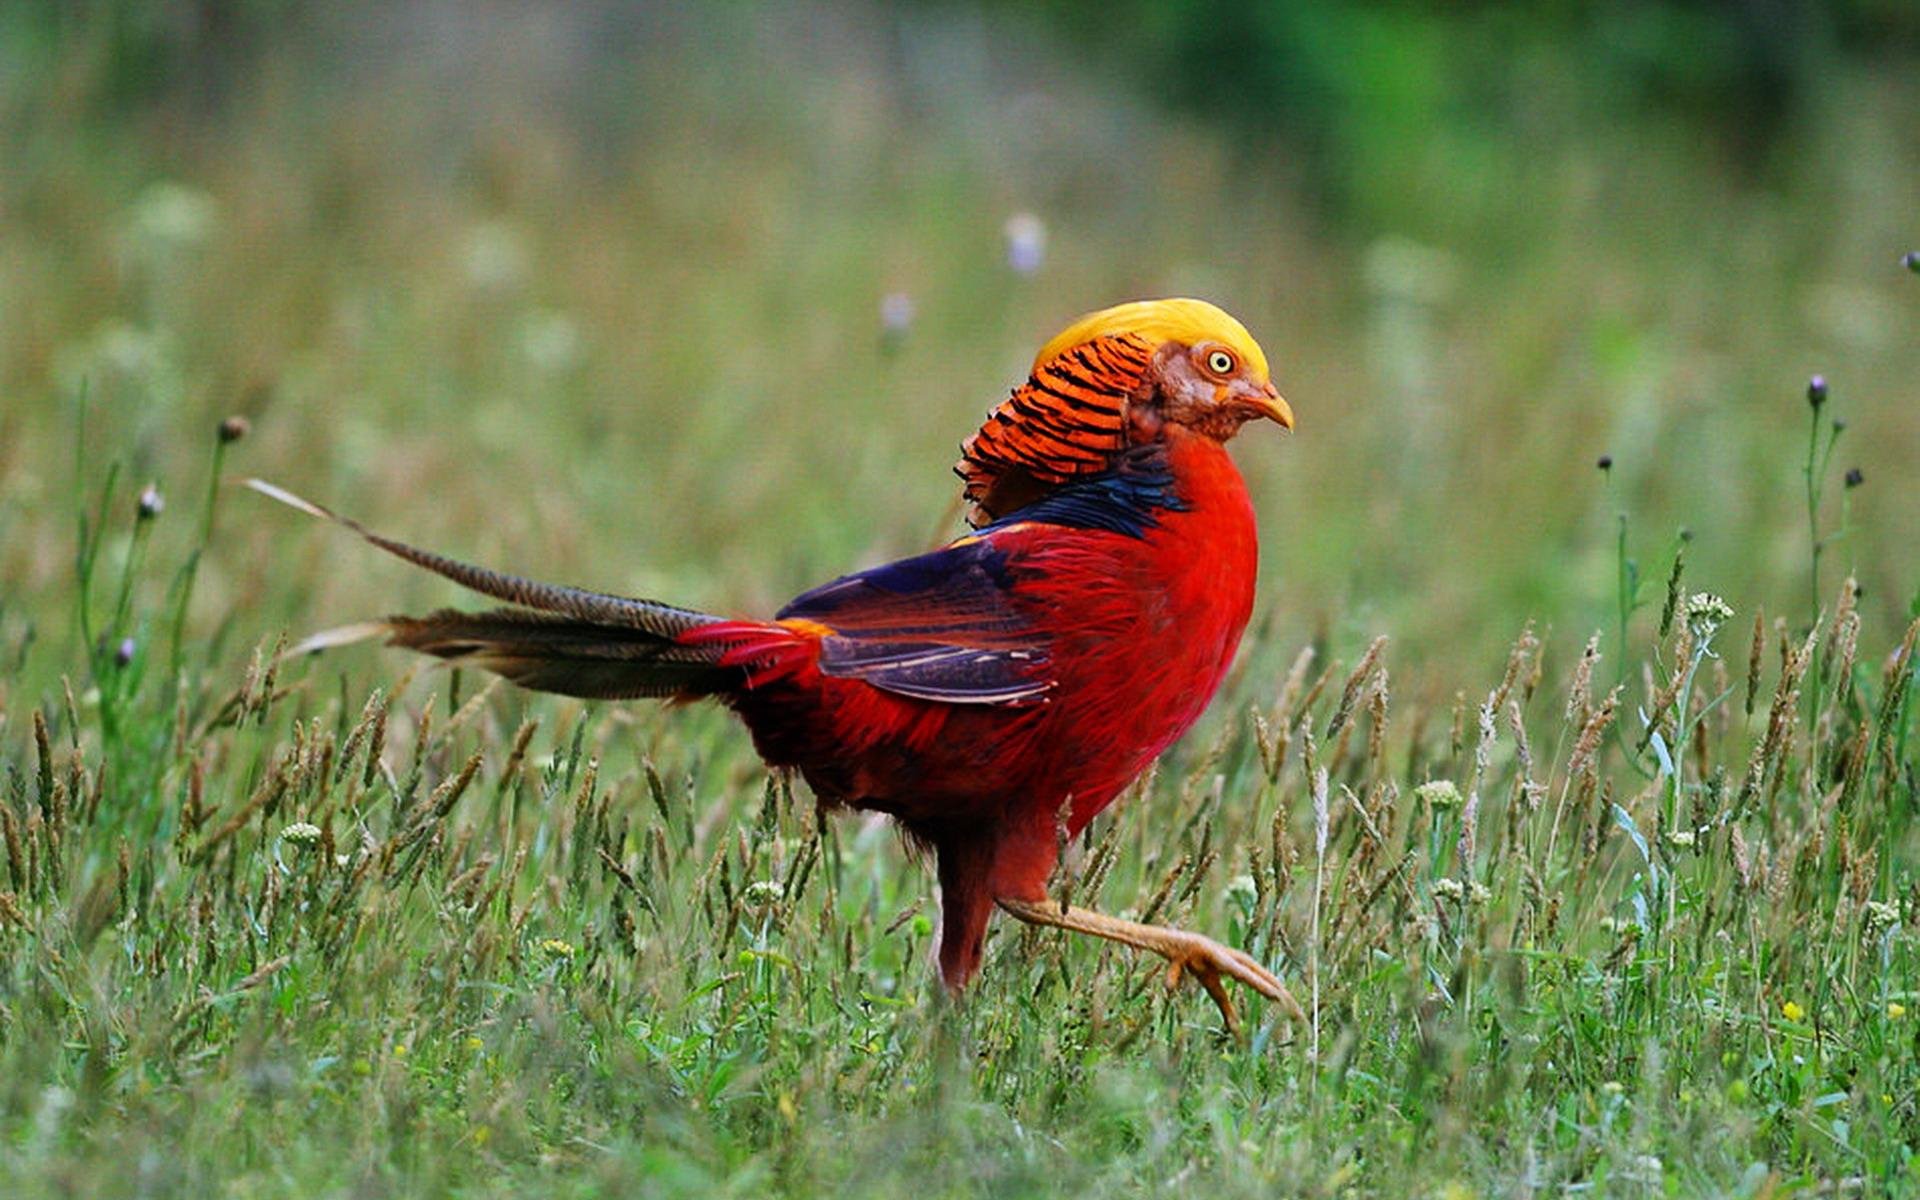 Golden Pheasant Full Hd Wallpaper And Background Image HD Wallpapers Download Free Images Wallpaper [wallpaper981.blogspot.com]